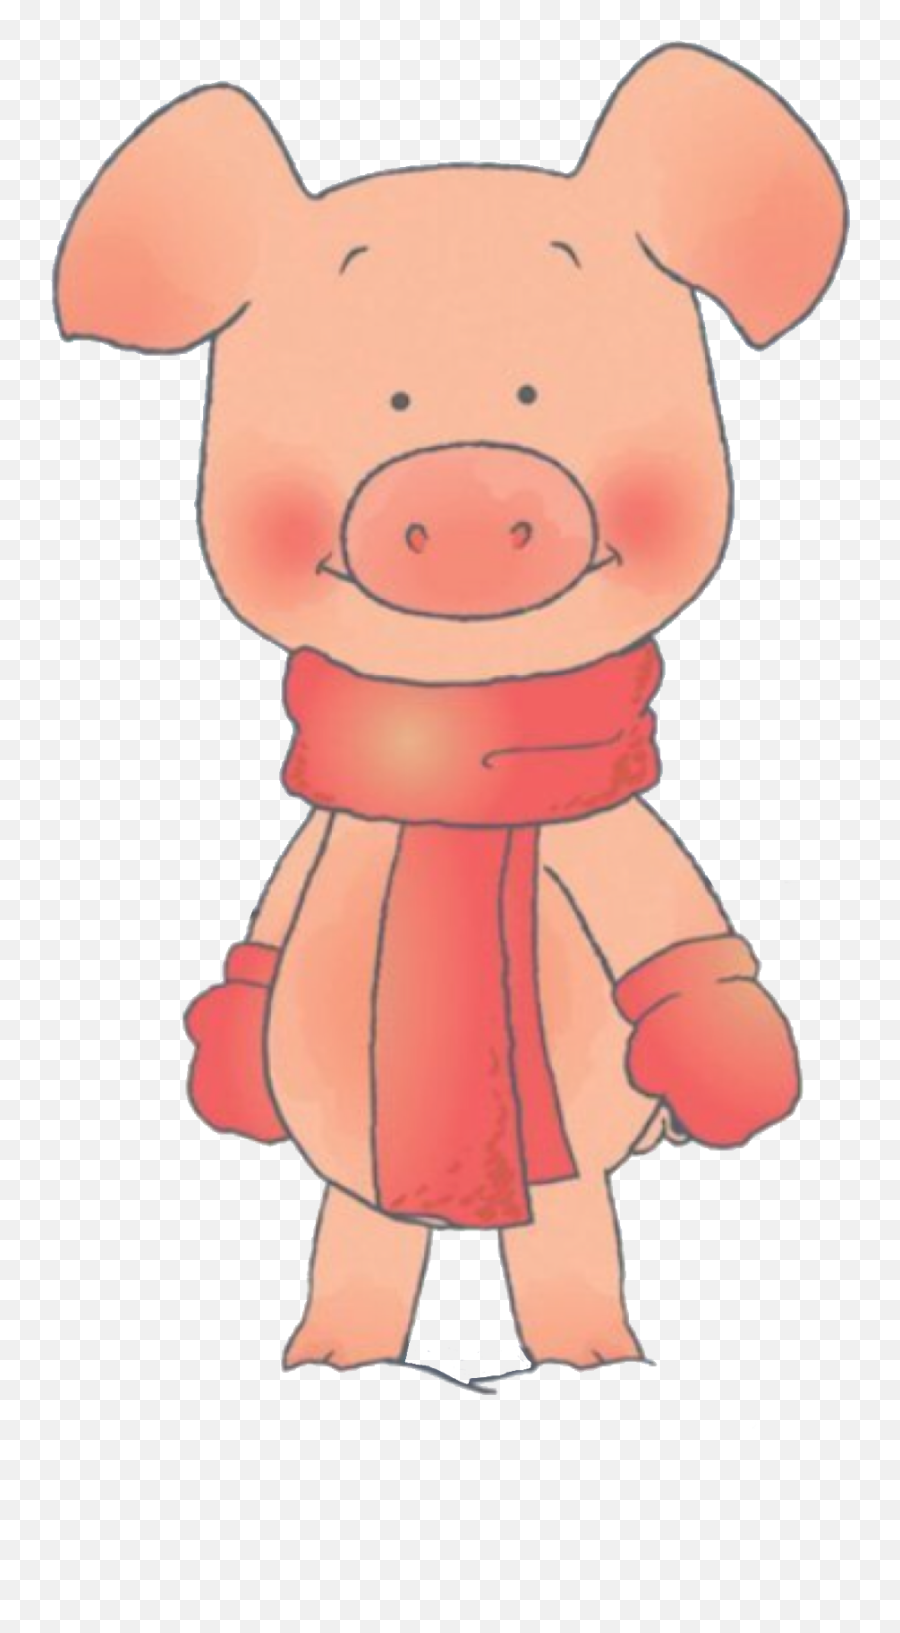 Cartoon Characters Wibbly Pig Pngu0027s - Wibbly Pig Png,Pig Png